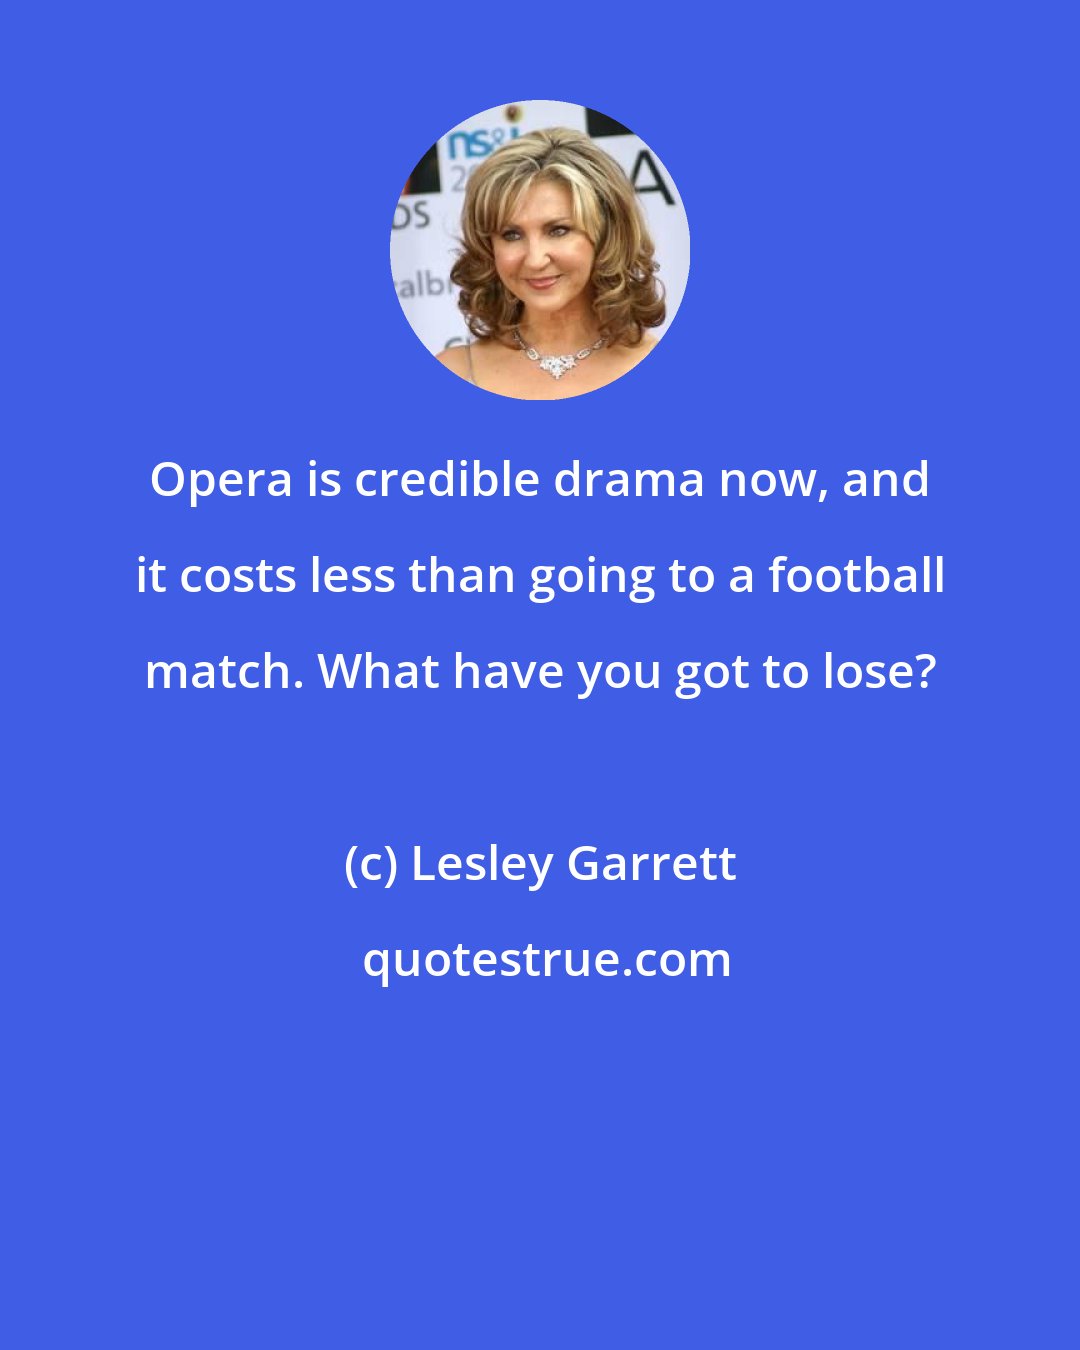 Lesley Garrett: Opera is credible drama now, and it costs less than going to a football match. What have you got to lose?